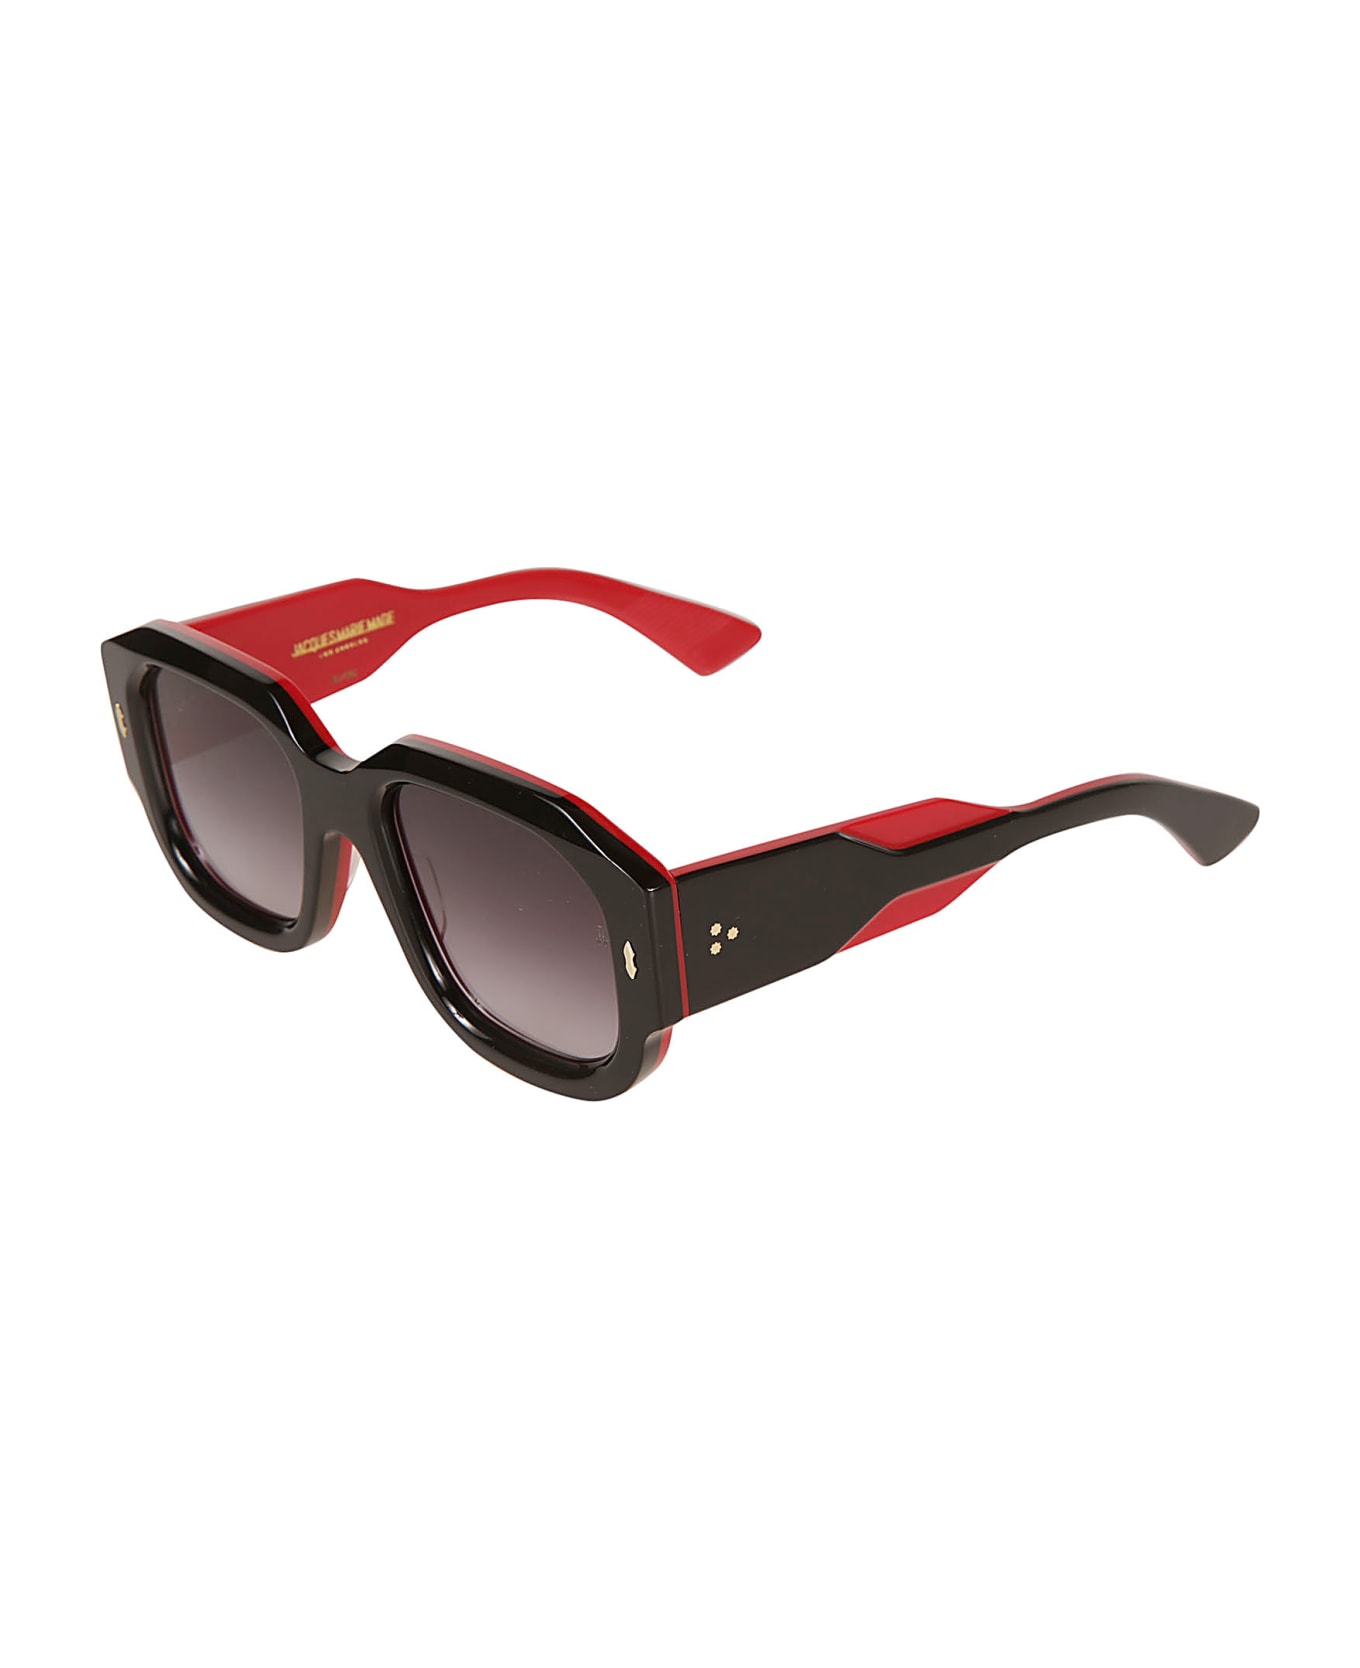 Jacques Marie Mage Lacy Sunglasses - Nightfall